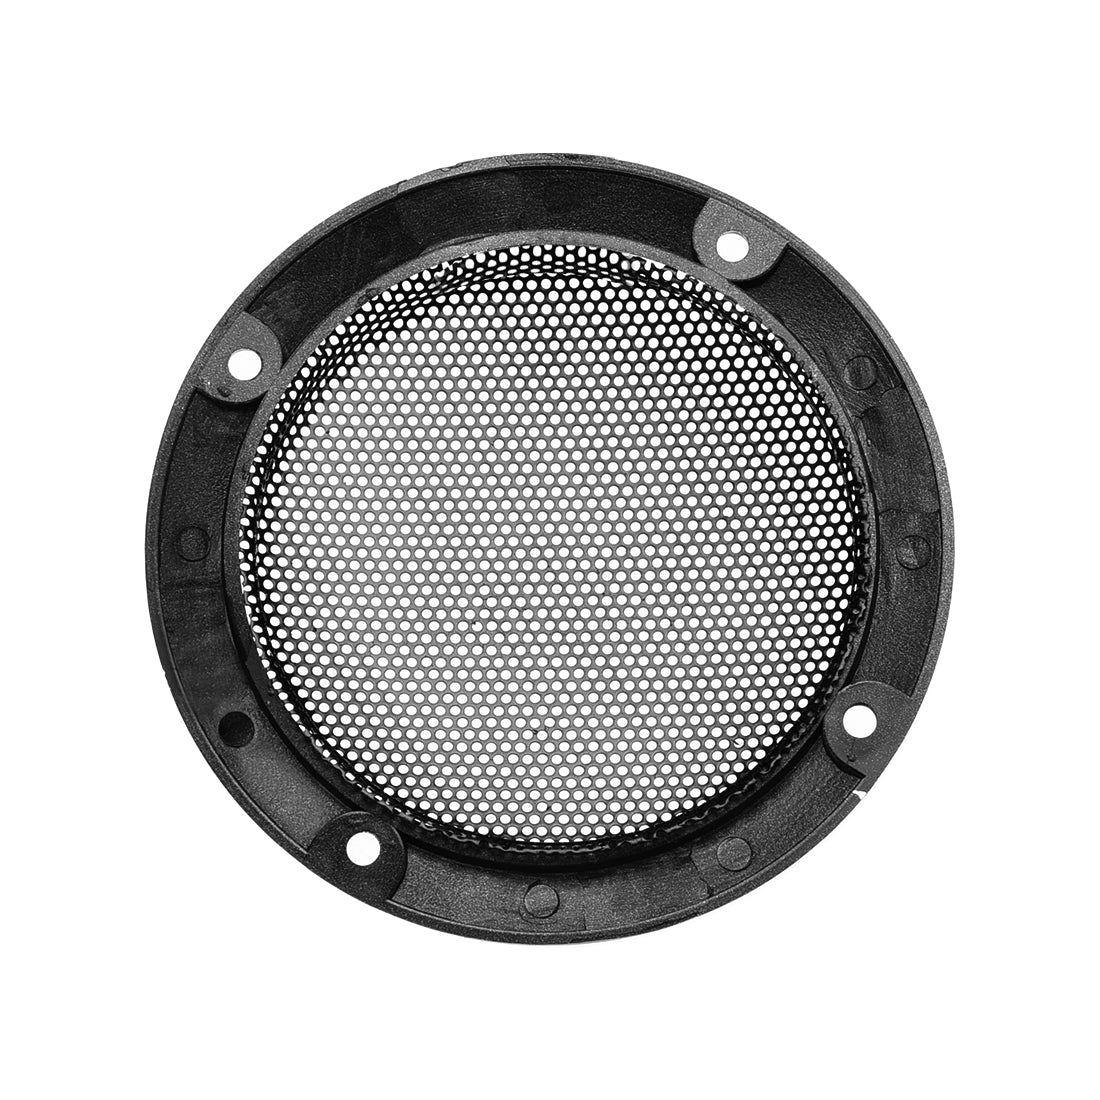 uxcell Uxcell Grill Cover 3 Inch 95mm Mesh Decorative Circle Subwoofer Guard Protector Black